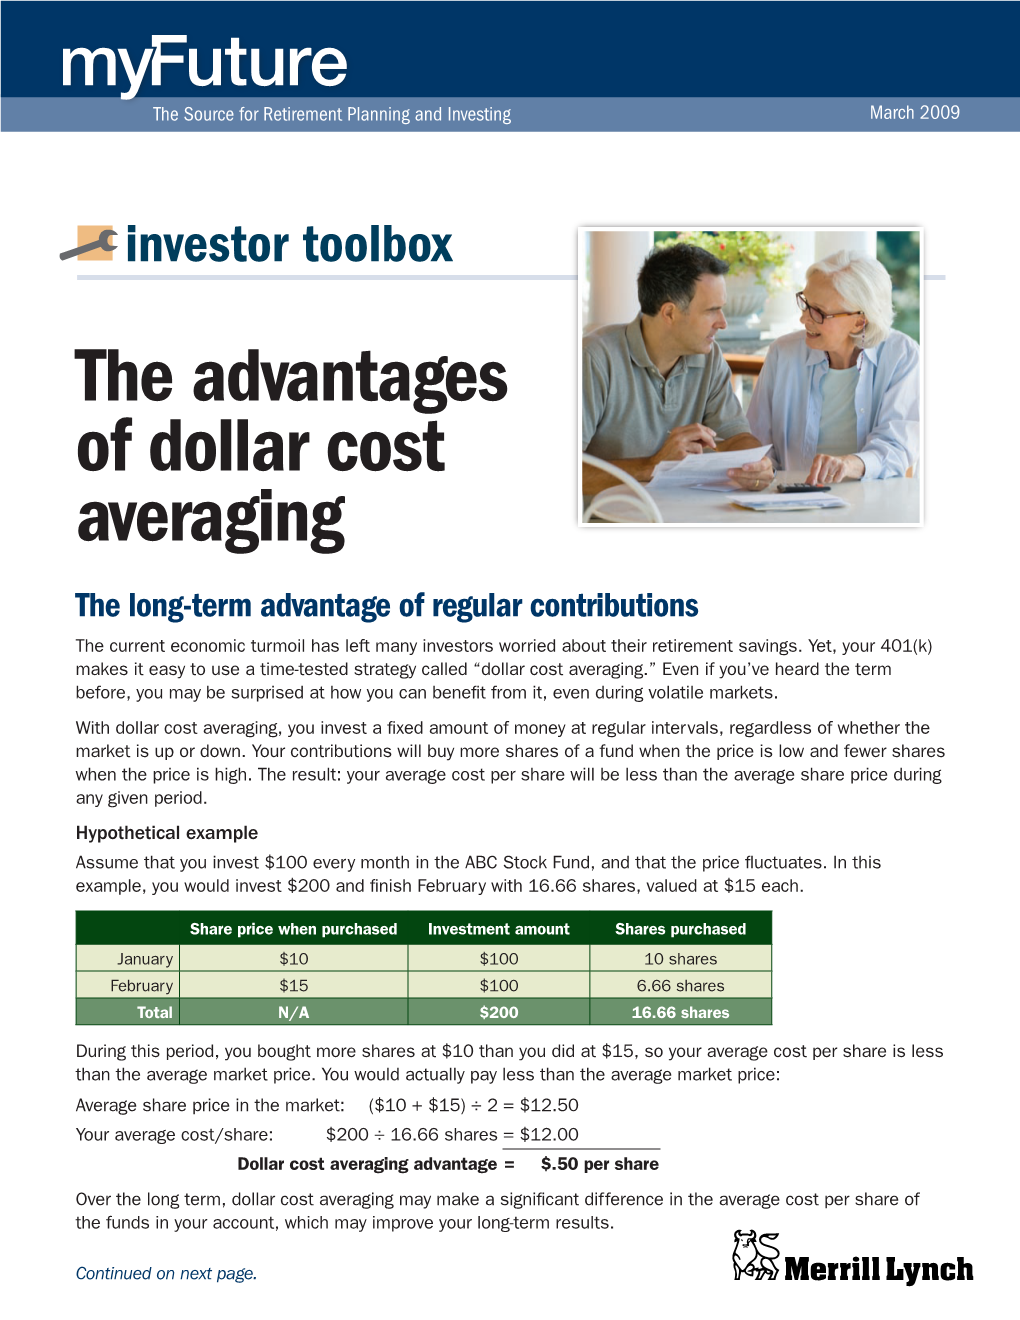 The Advantages of Dollar Cost Averaging